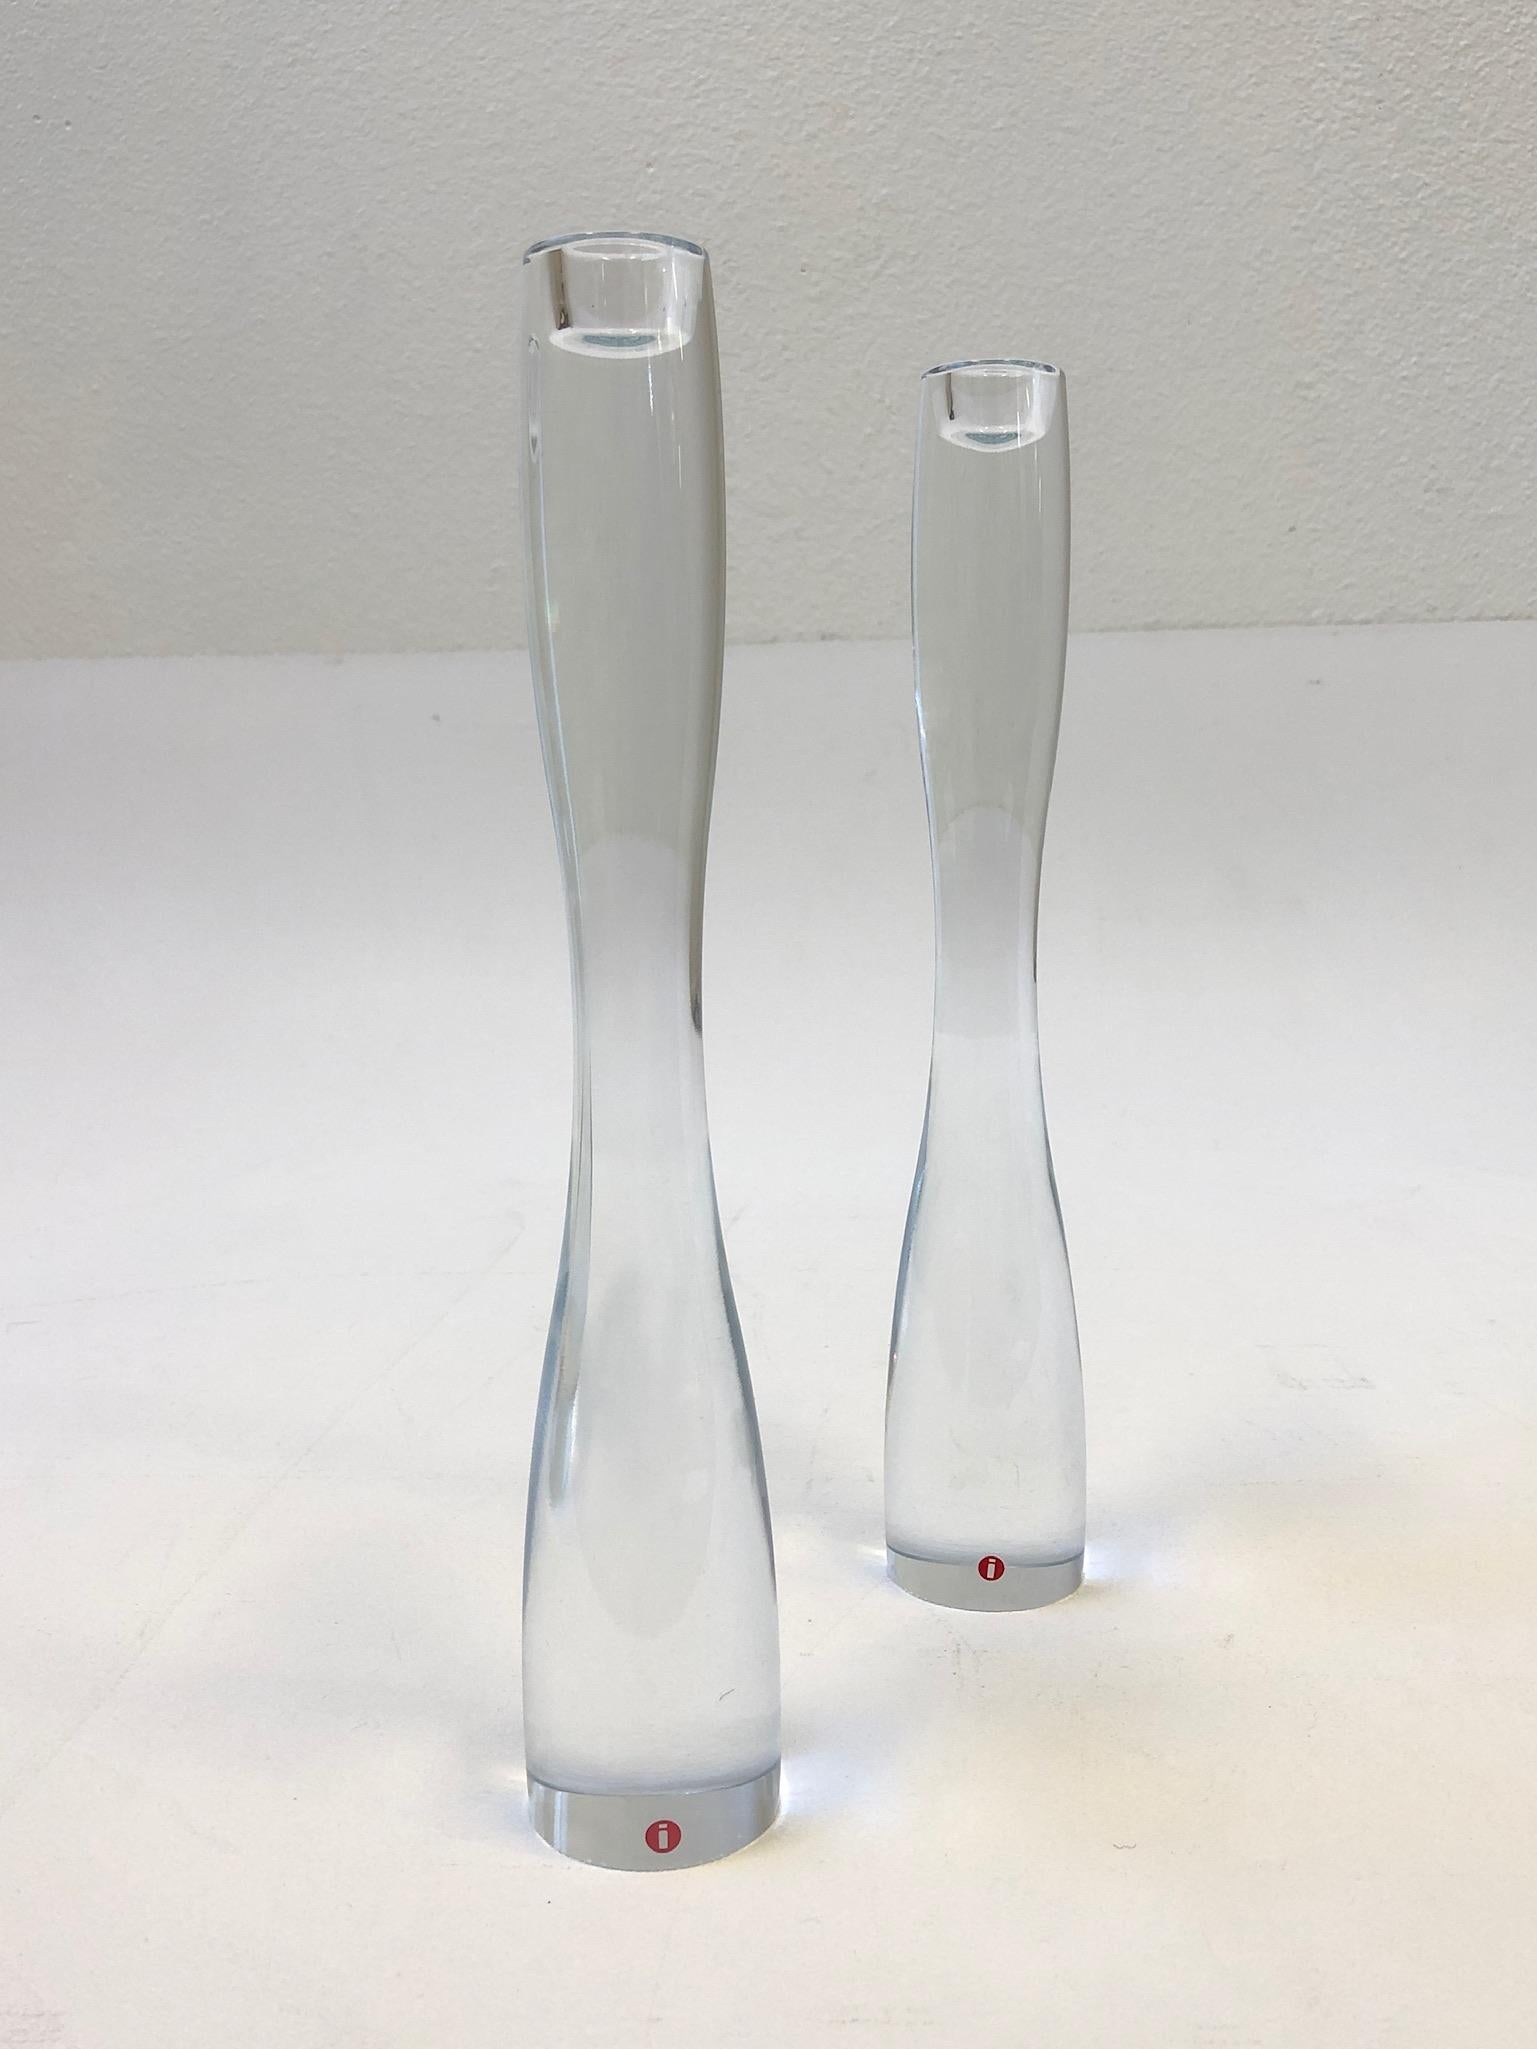 A beautiful pair of Finnish crystal candleholders design by Timo Sarpaneva for Iittala in 1994. Both candleholders are signed, dated and retain the Iittala label (see detail photos).

Dimension: 12” high, 2” diameter.